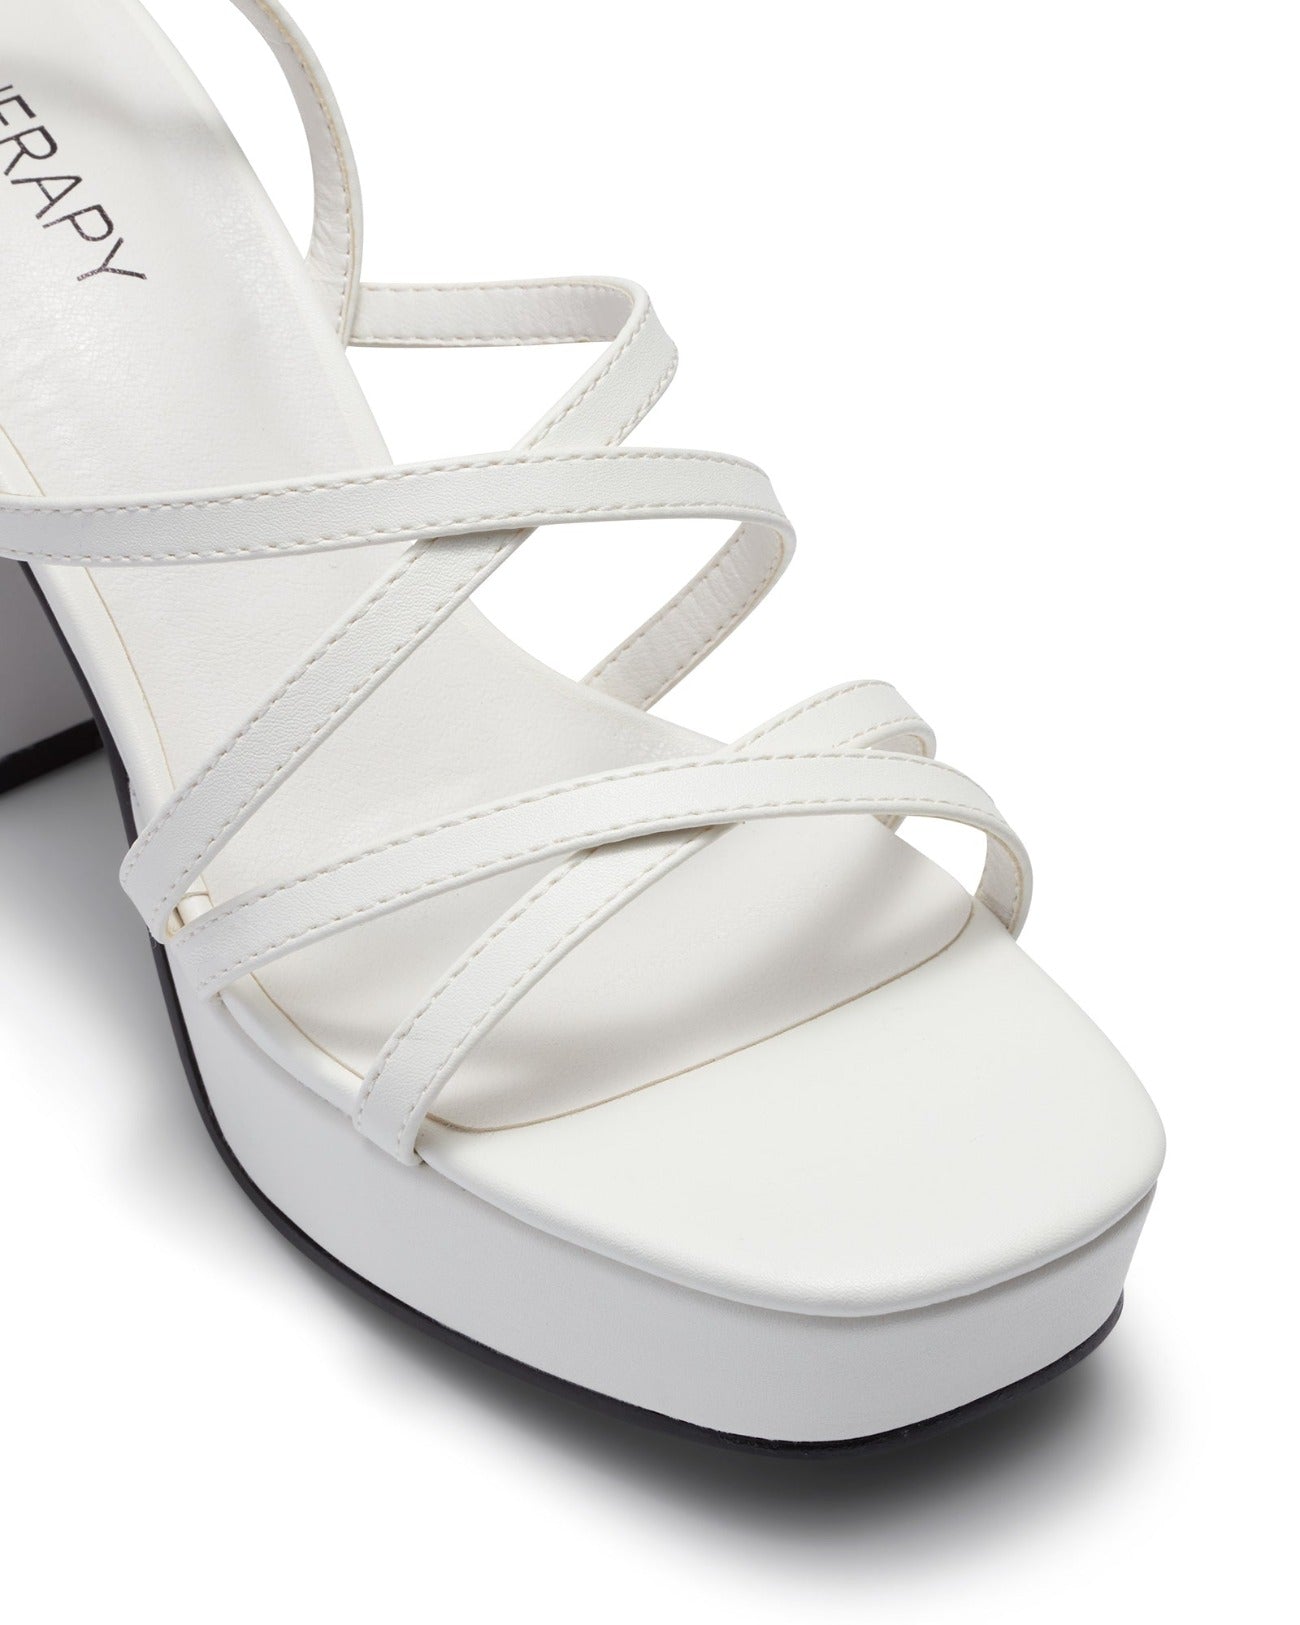 Therapy Shoes Ada White | Women's Heels | Sandals | Platform | Strappy